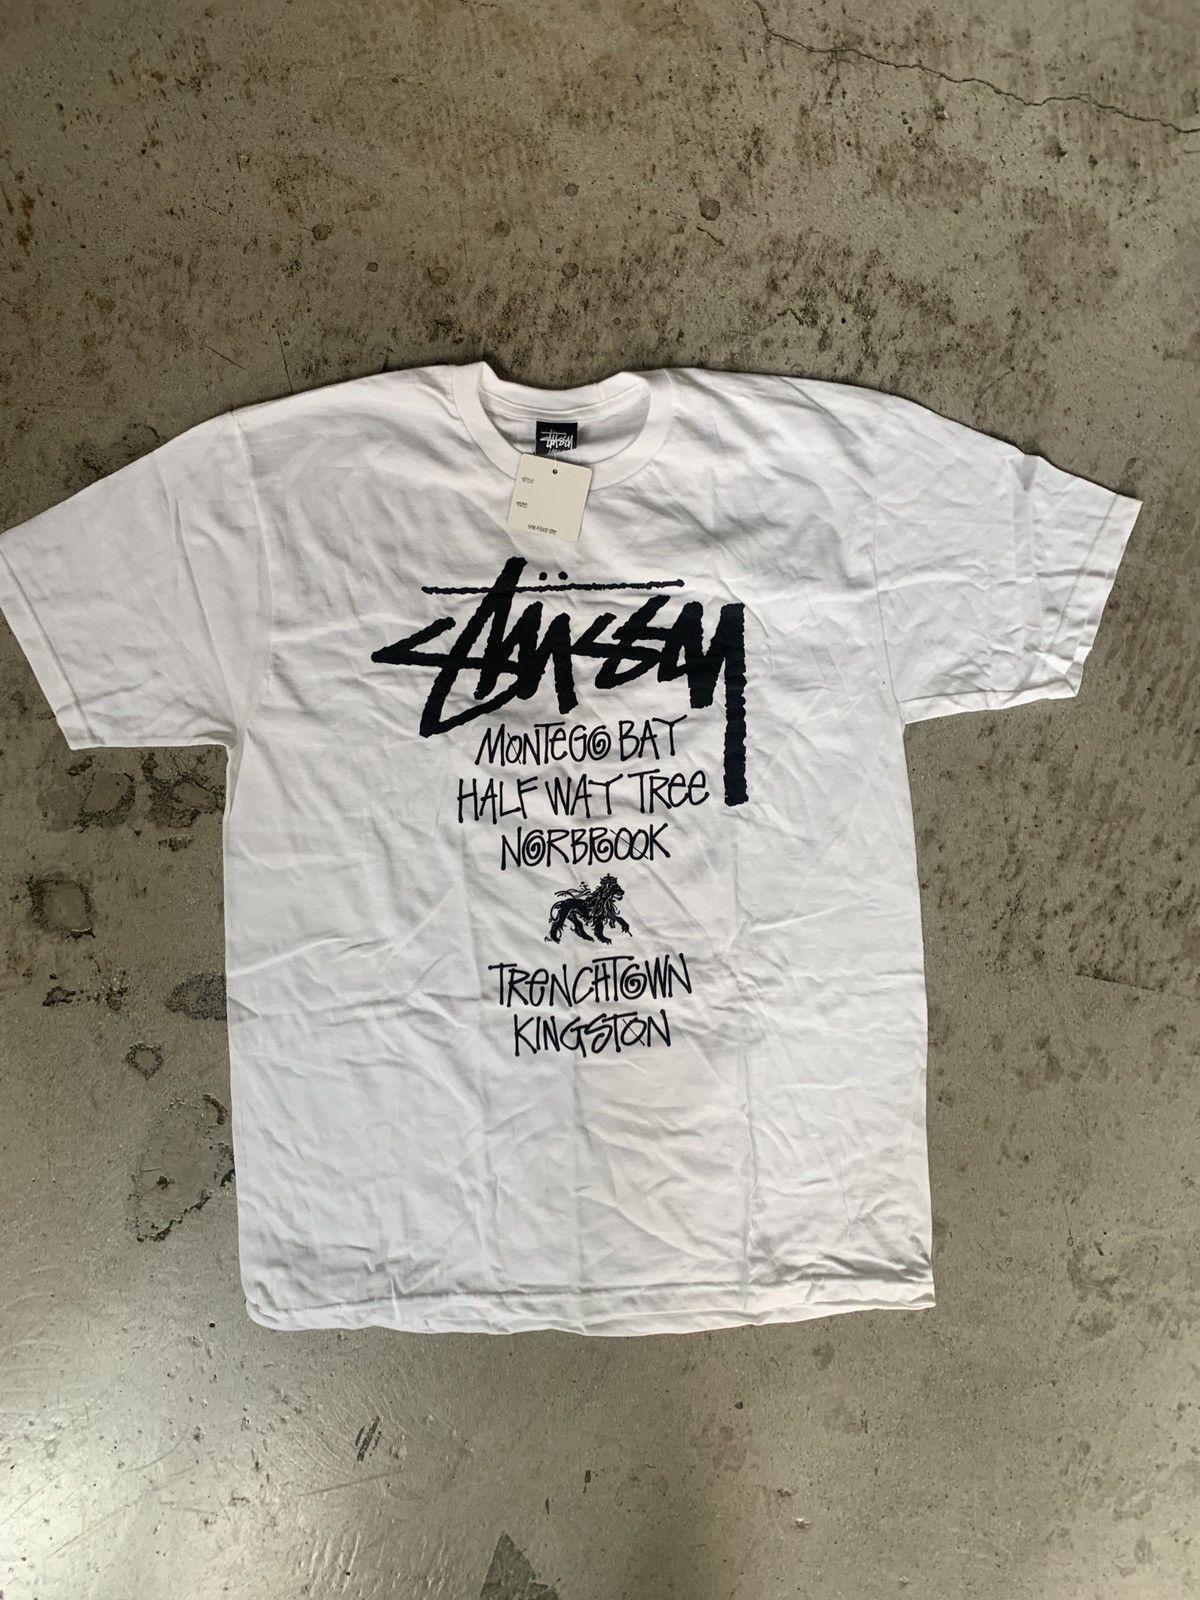 Stussy Archive Stussy Tribe T-shirt | Grailed